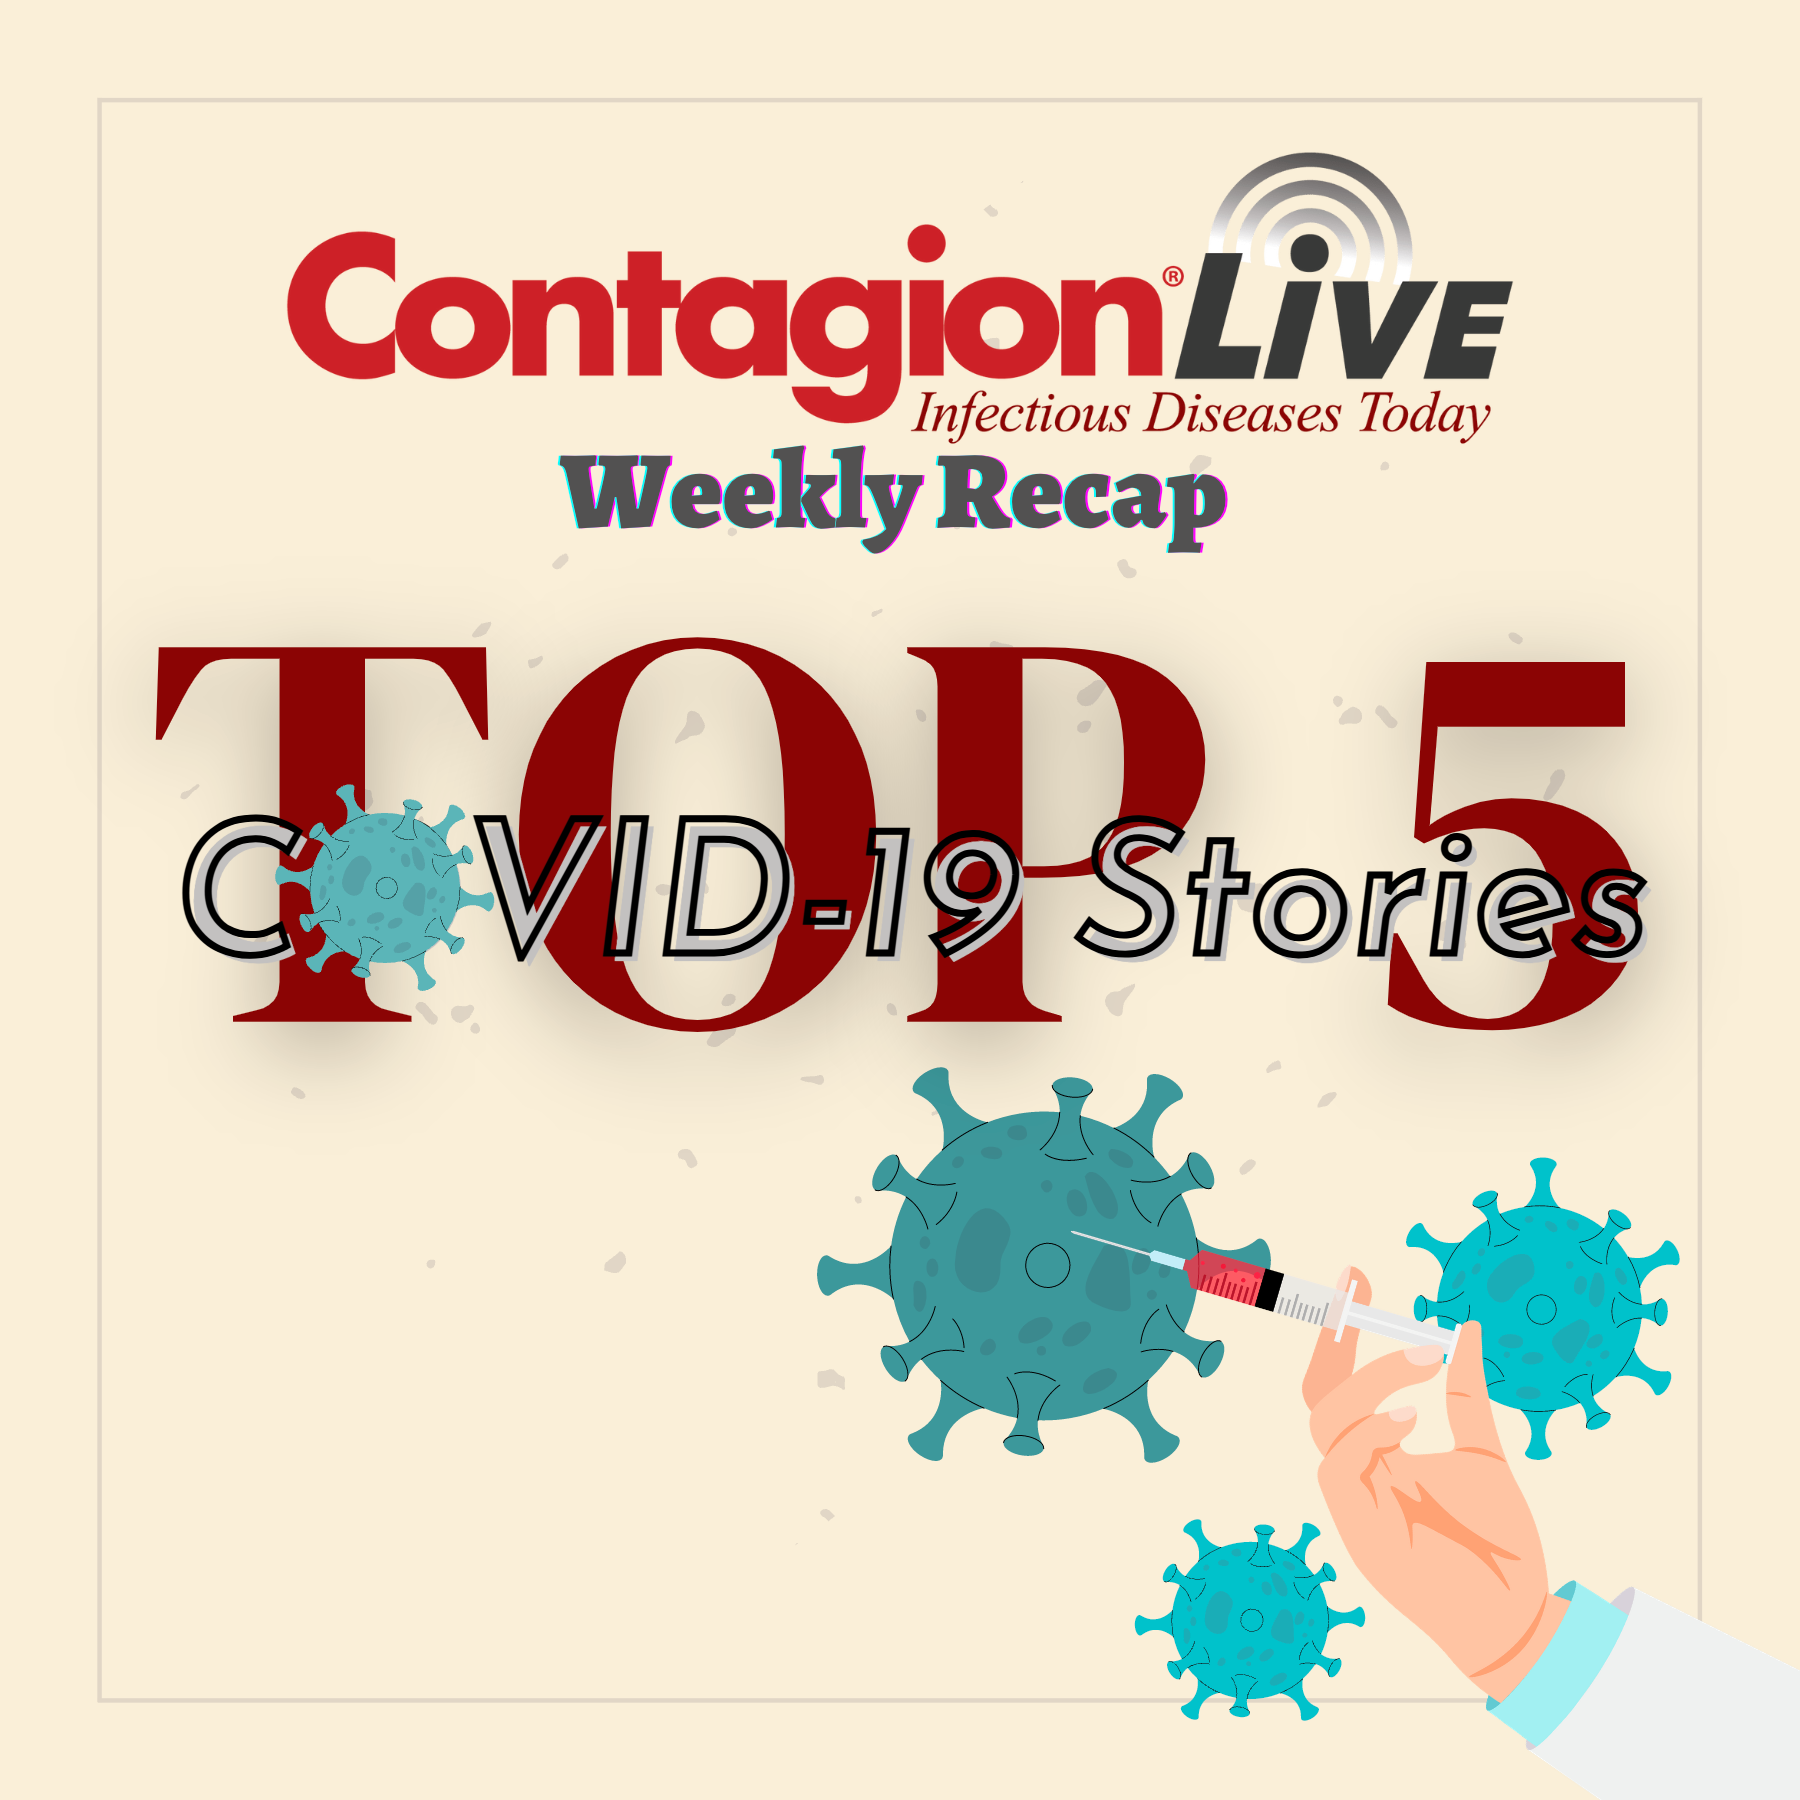 COVID-19 News Update: The Top 5 Stories This Week